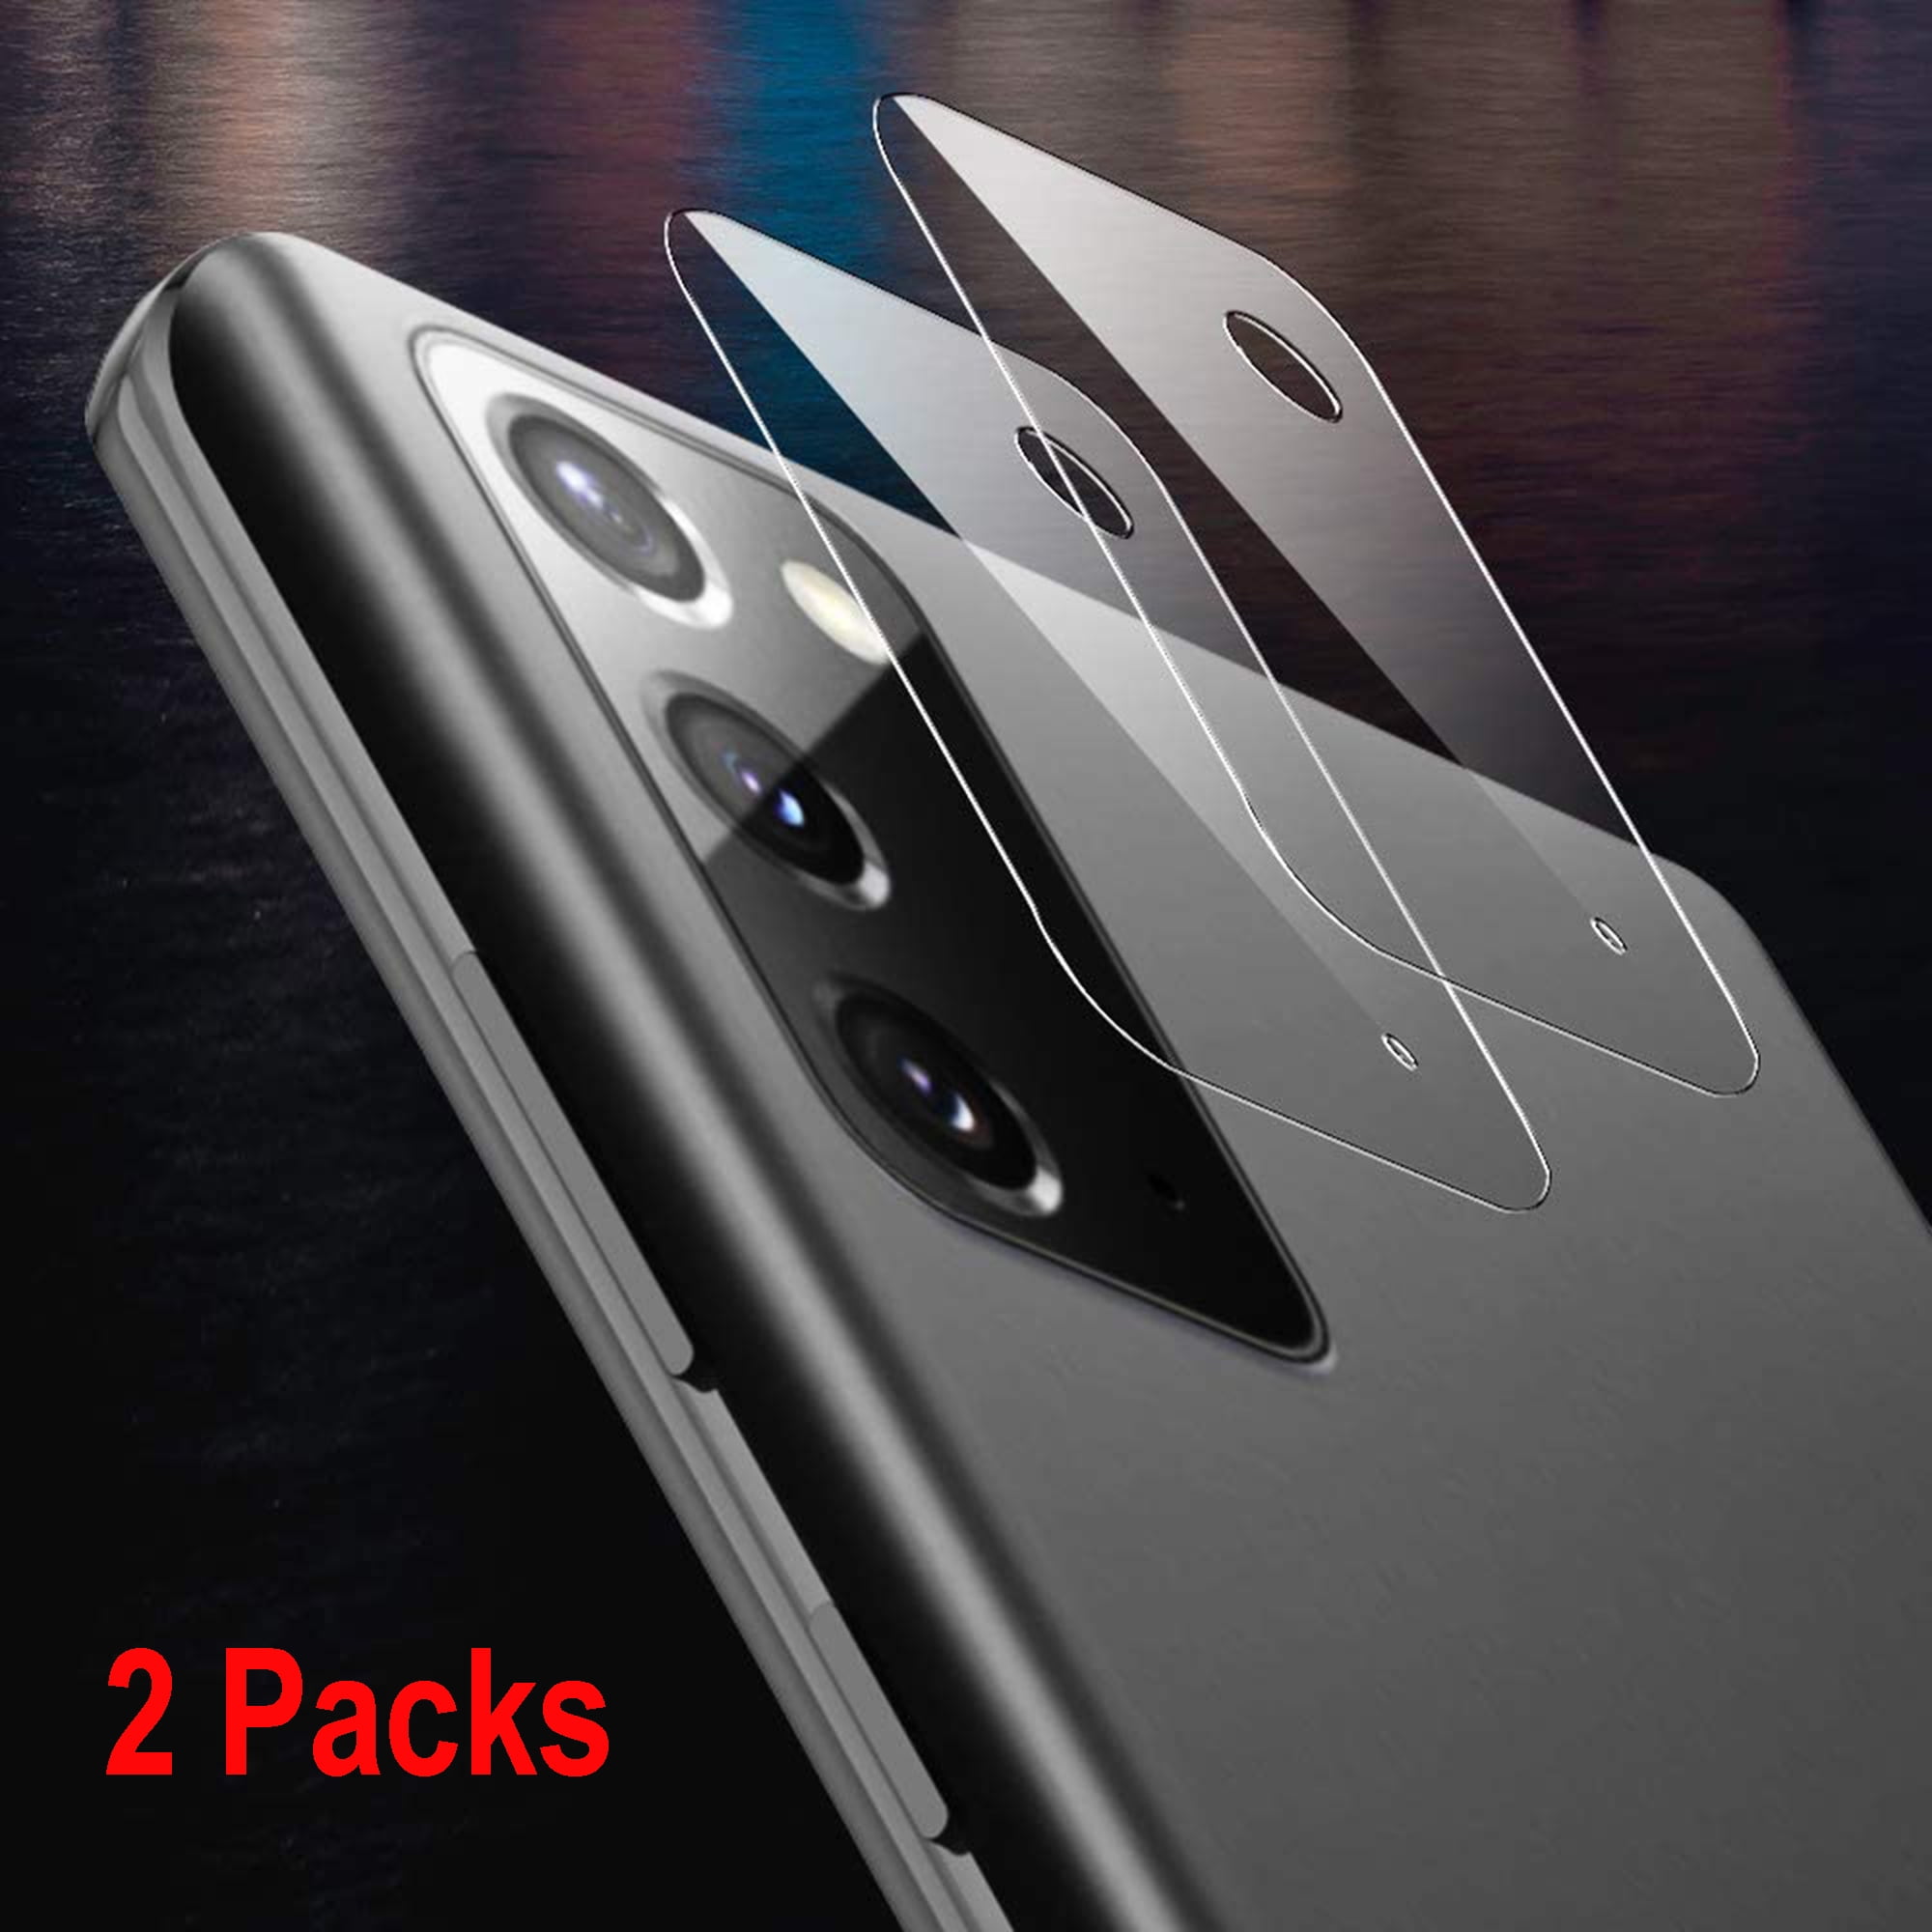 3 Pack Camera Lens Protector Compatible with Samsung Galaxy Note 10 Plus 6.8-inch Positioning Tool 5 Pack LK 2 Pack Screen Protector HD Ultra-Thin Flexible TPU Film 